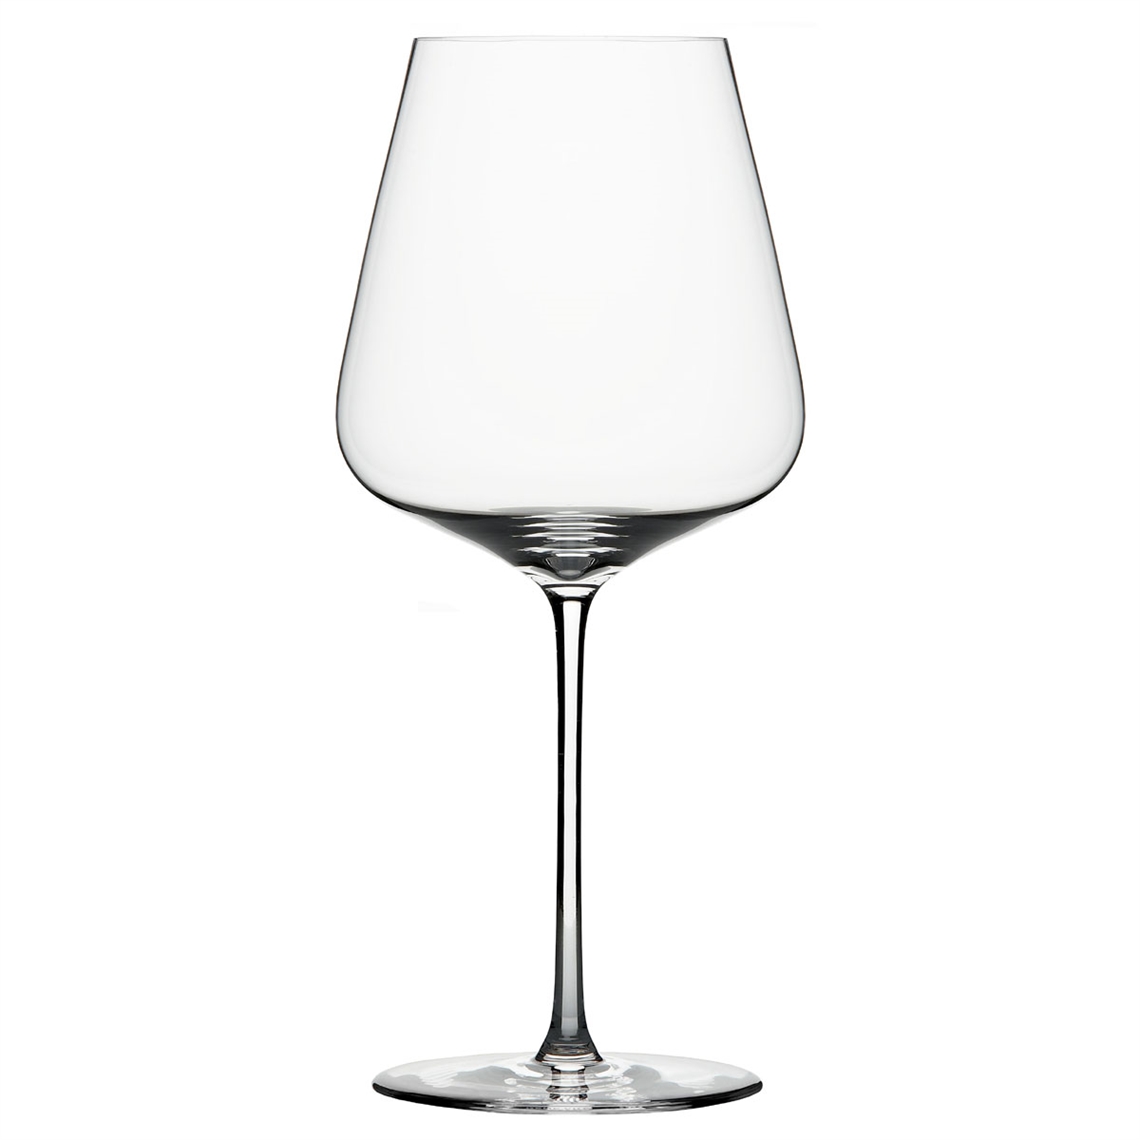 View more ivento from our Premium Mouth Blown Glassware range